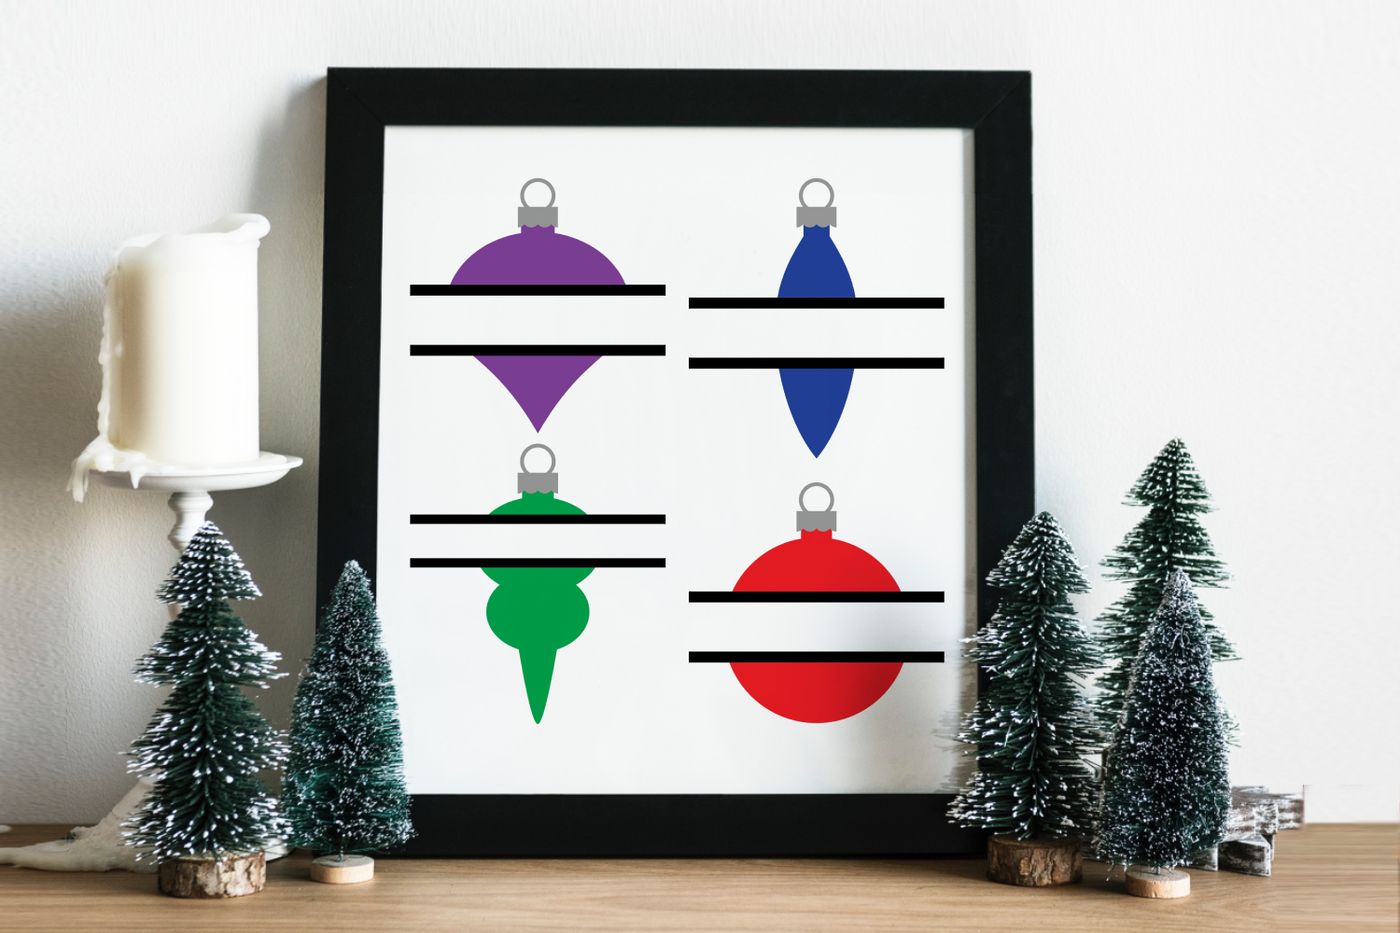 4 Christmas ornament designs with a split in the middle